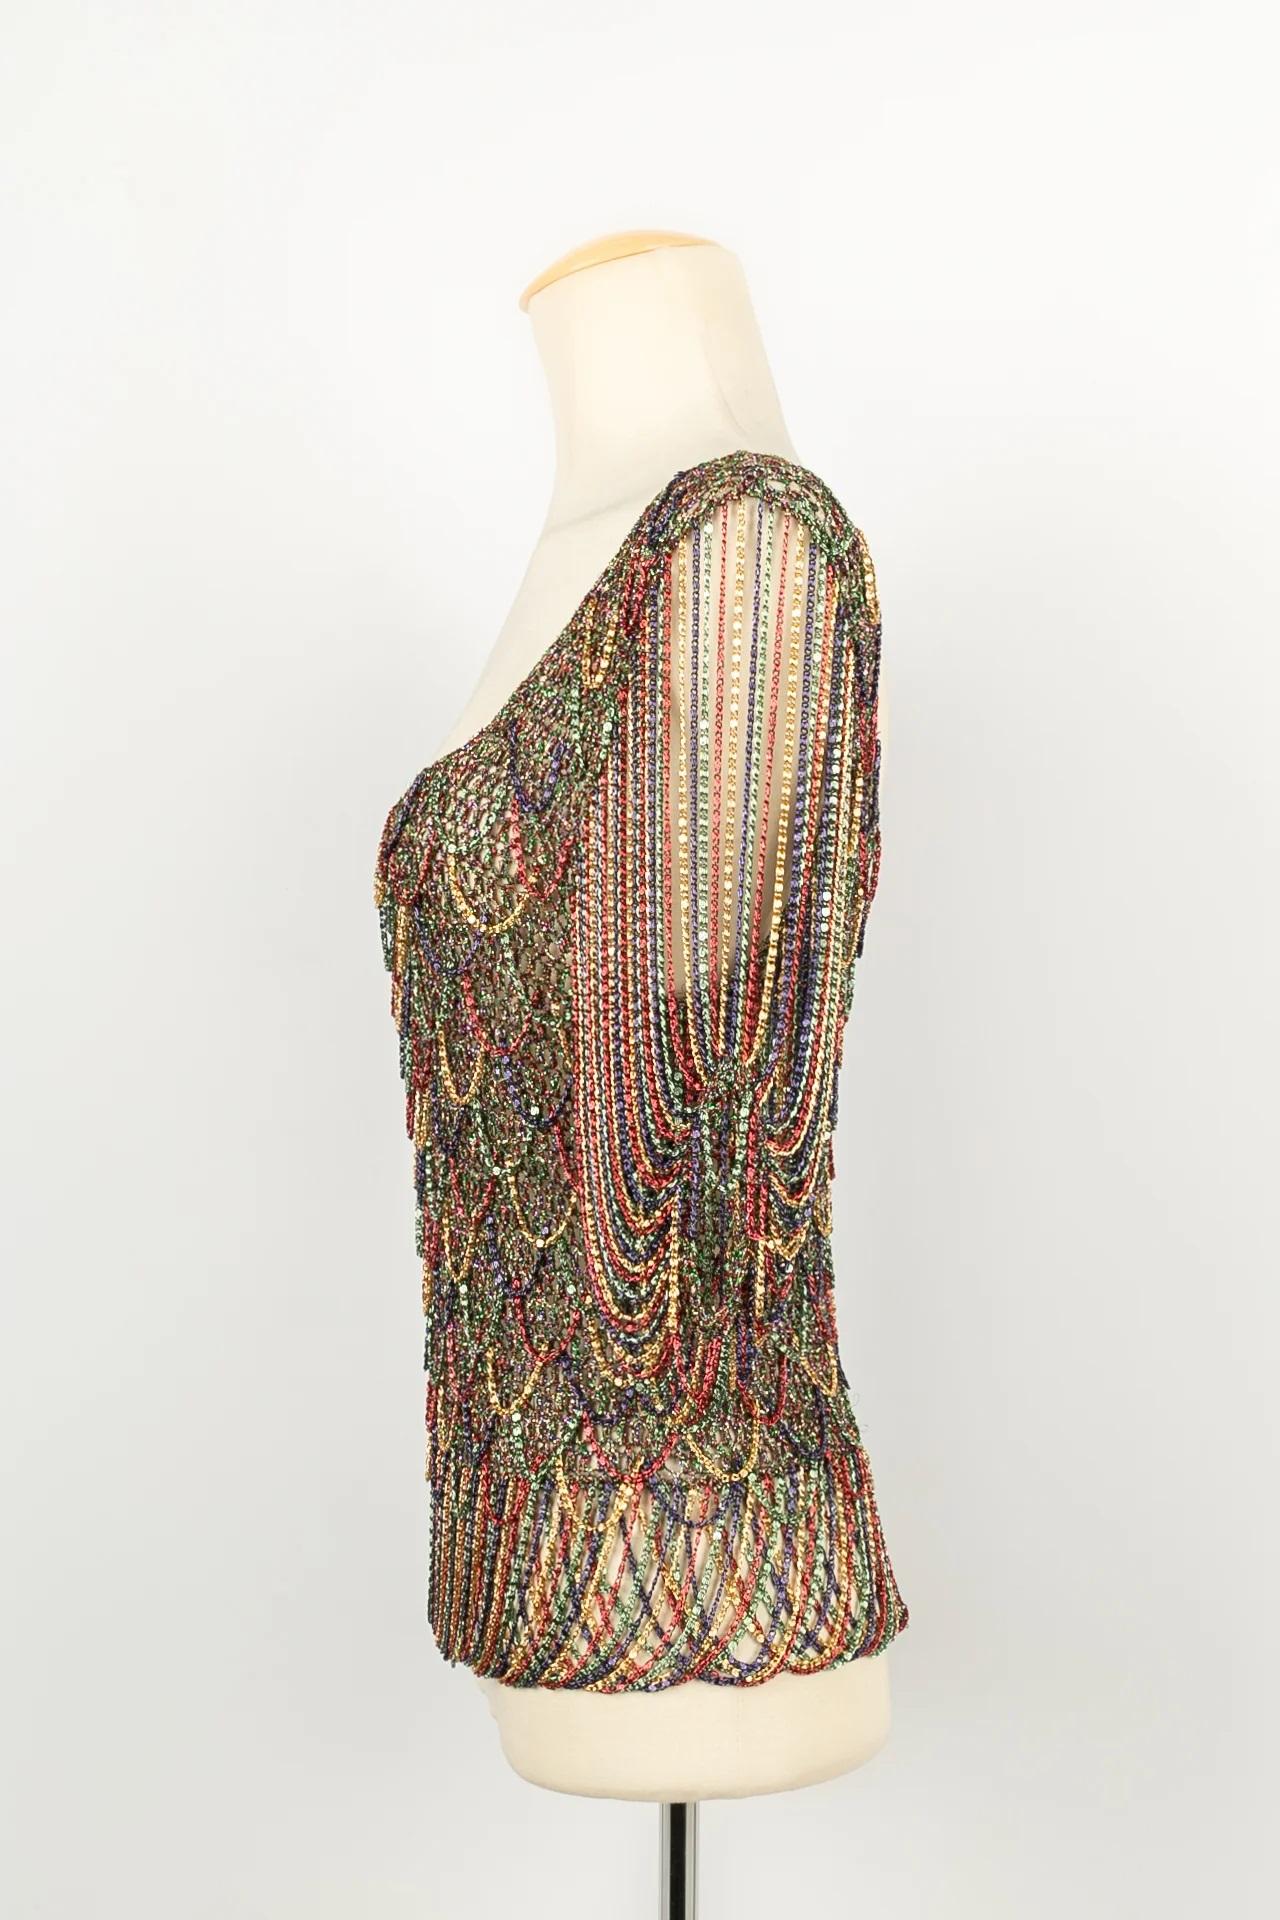 Azzaro -(Made in France) Top from the 1970s in multicolored lurex enlivened with chains. No composition and size labels, it fits a 36FR.

Additional information:

Dimensions: 
Sleeve length: 39 cm
Length: 59 cm

Condition: Very good